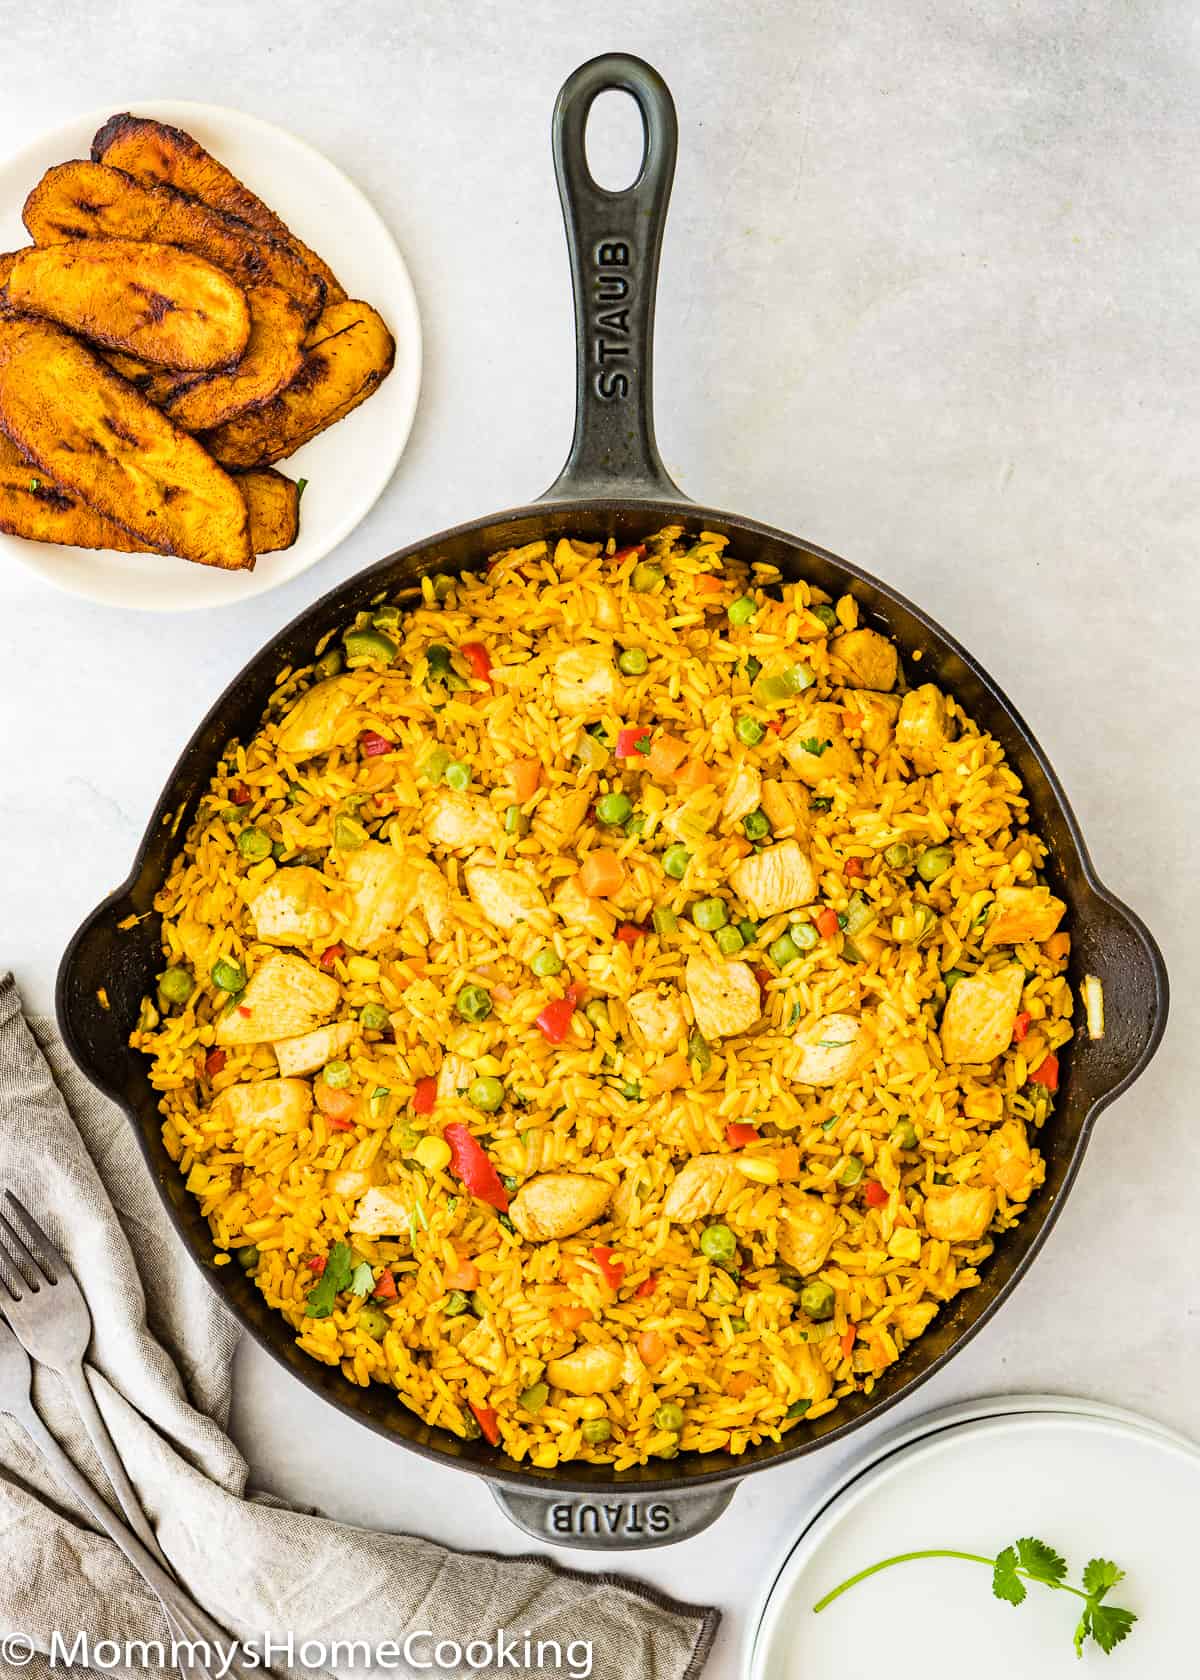 a cast iron skillet with arroz con pollo and a plate of fried plantains on the side.